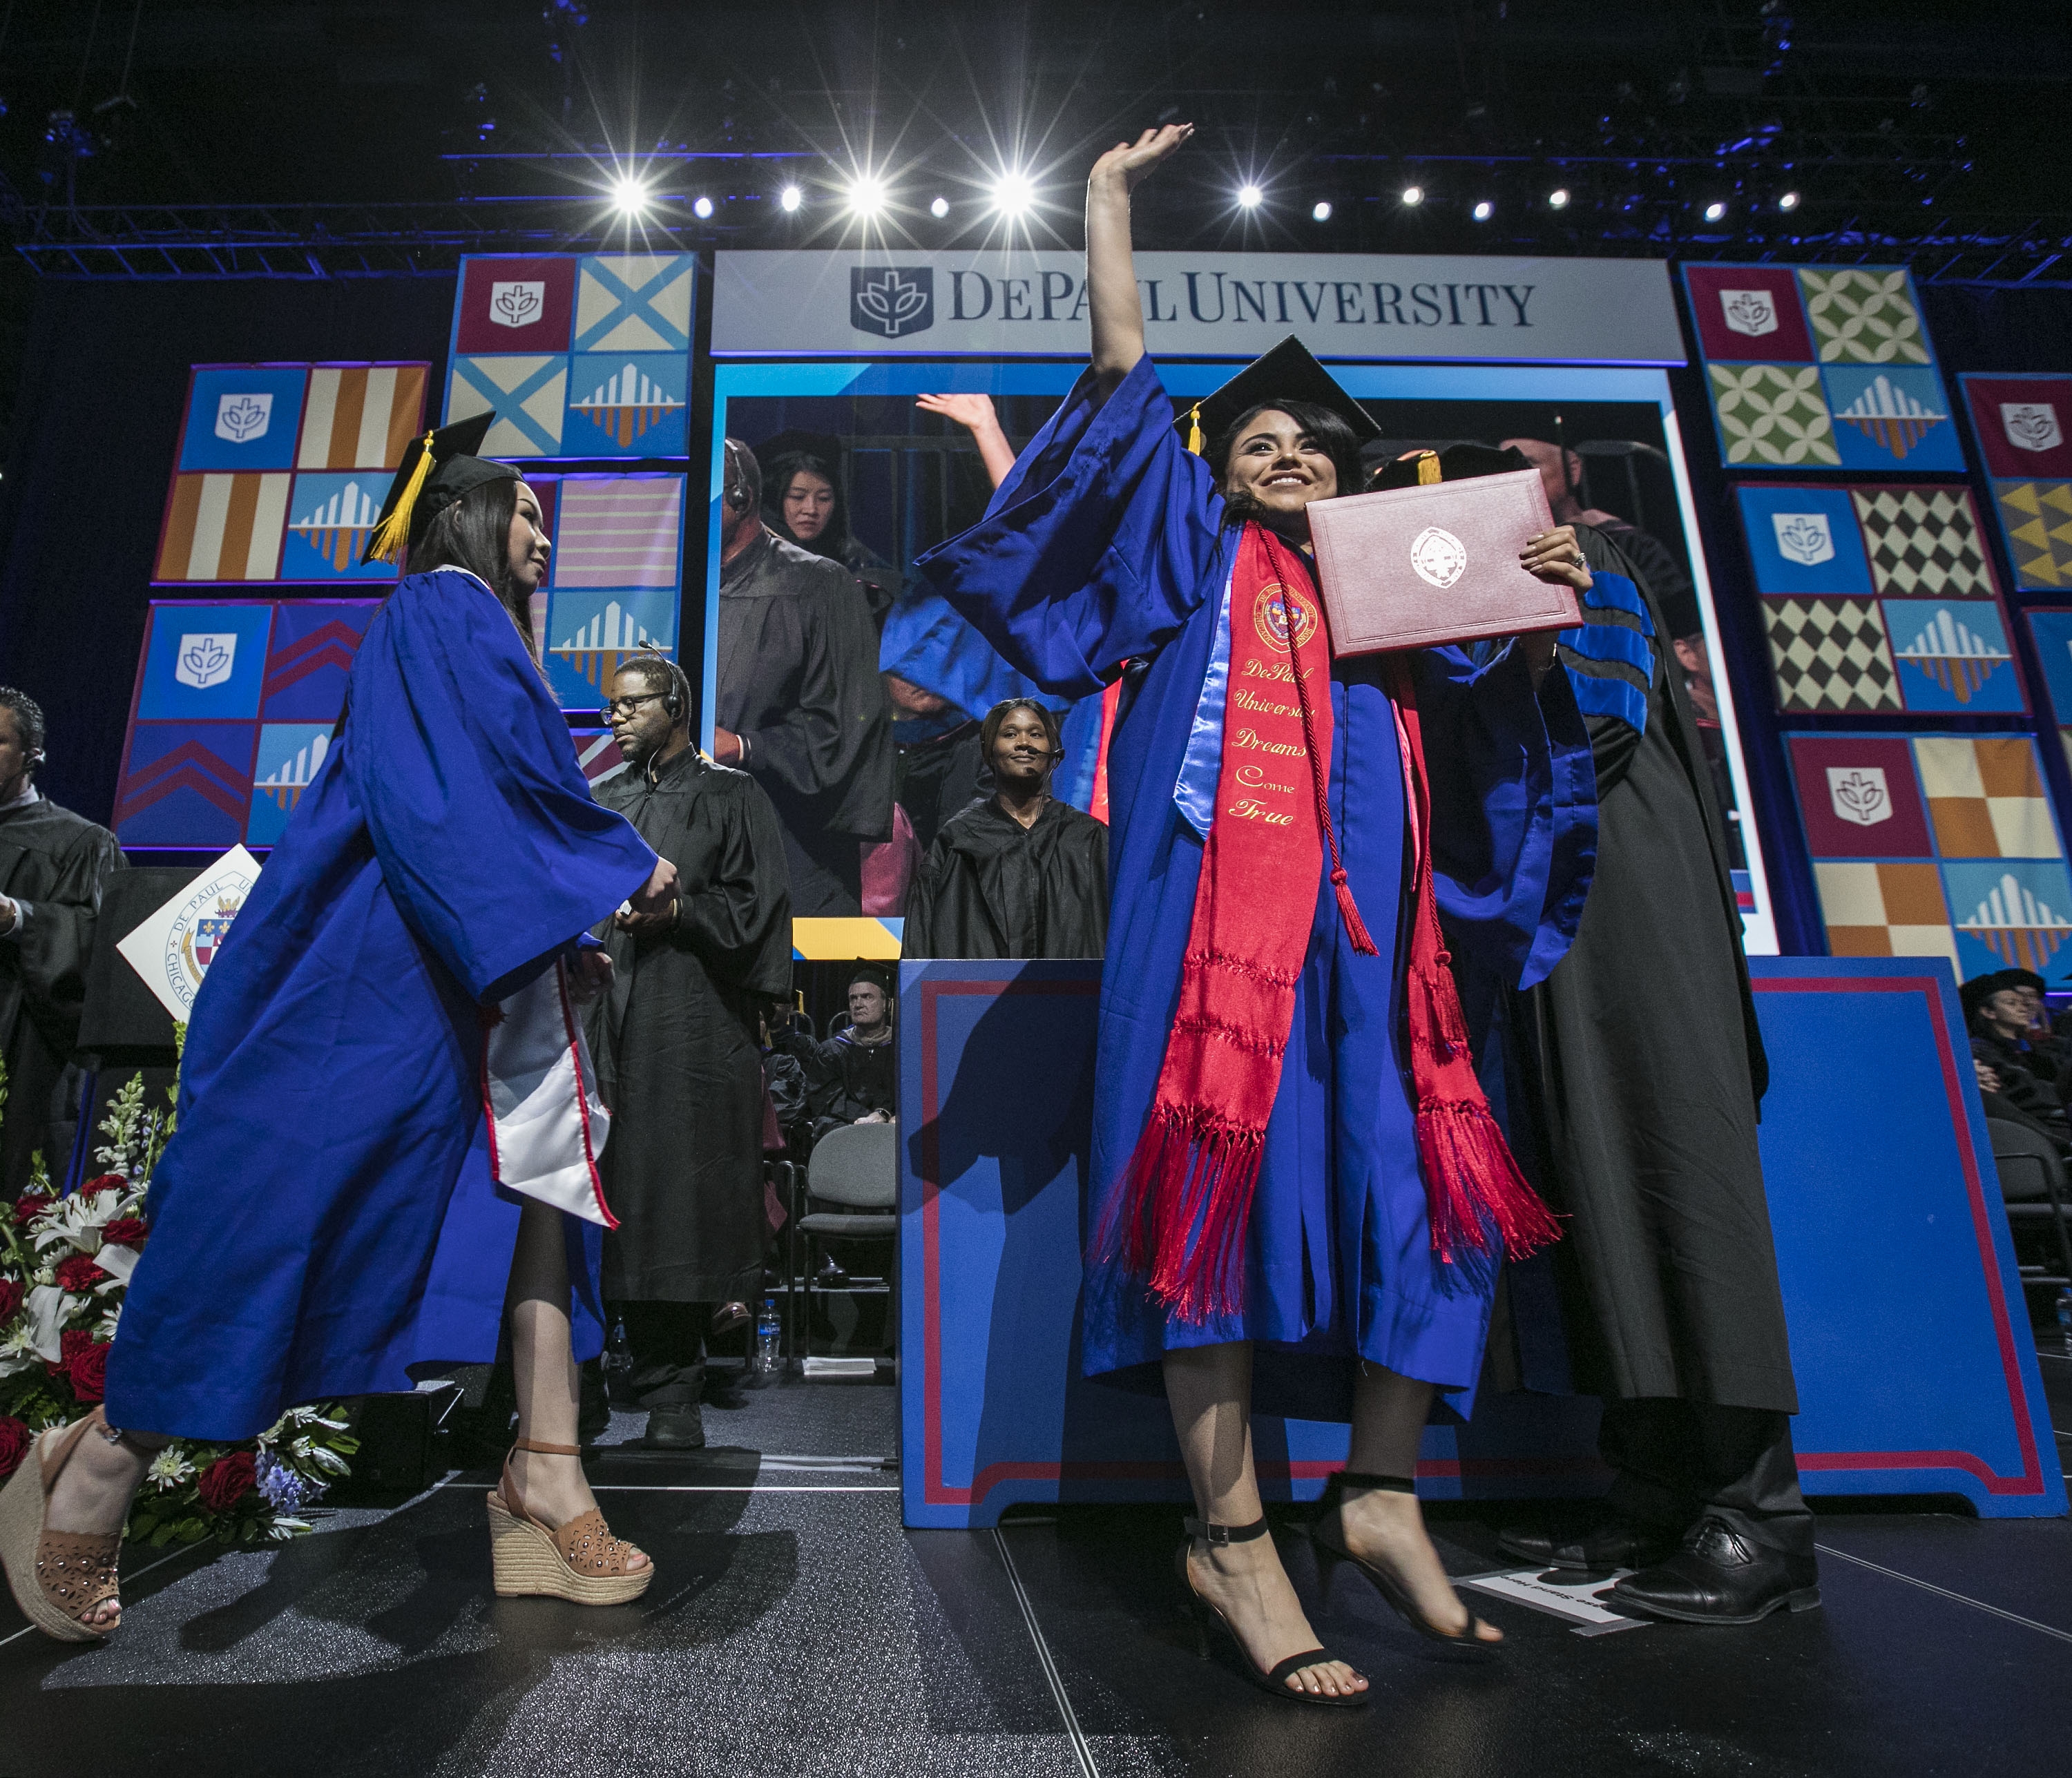 Graduates celebrate as they receive their diplomas during the commencement ceremony for the Driehaus College of Business. (DePaul University/Jamie Moncrief)